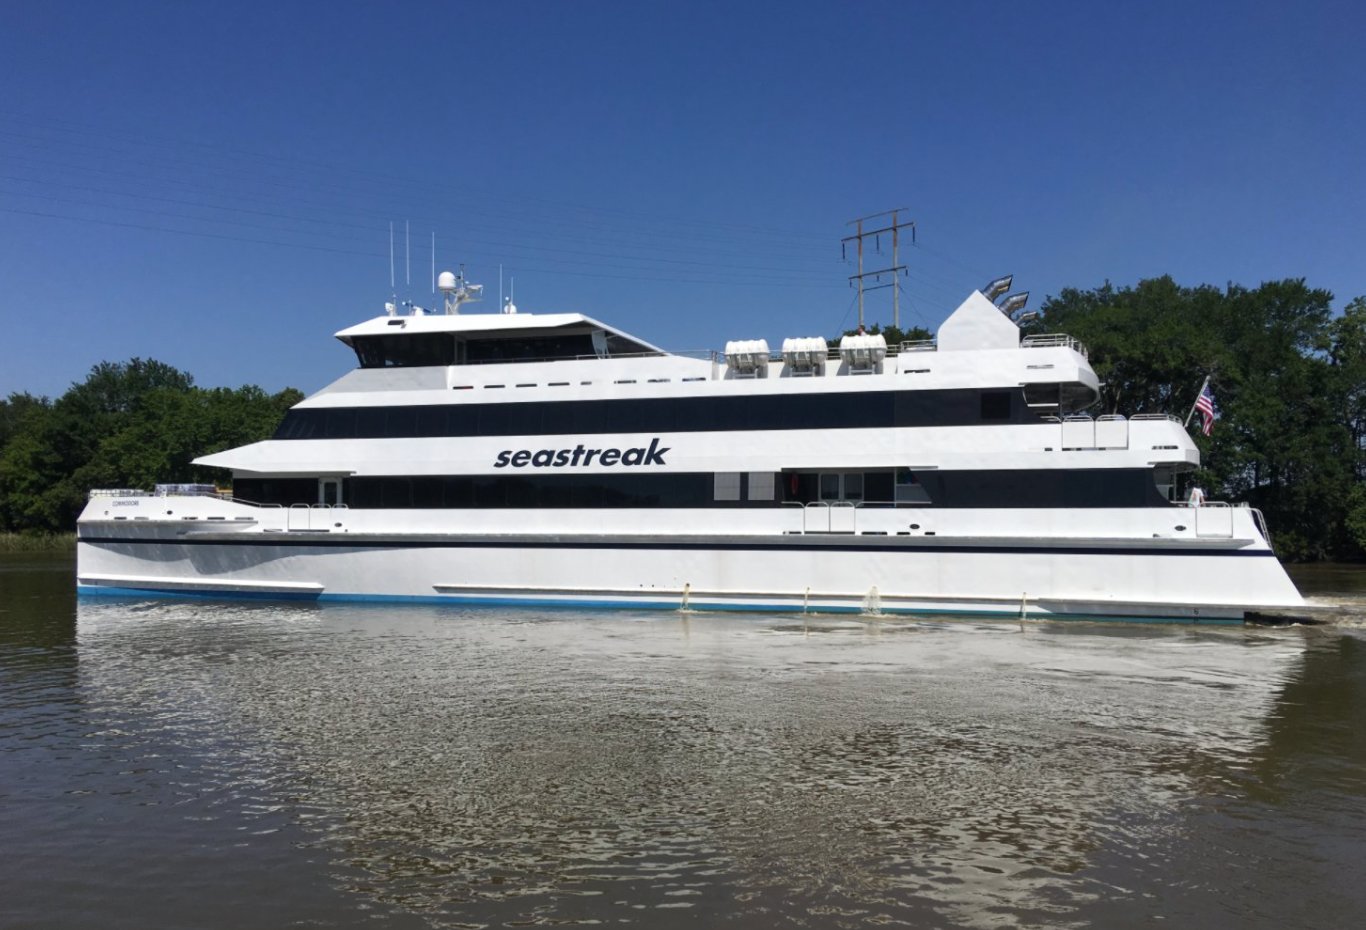 Seastreak’s new fast ferry Courageous will provide service between New York City and Nantucket this summer.